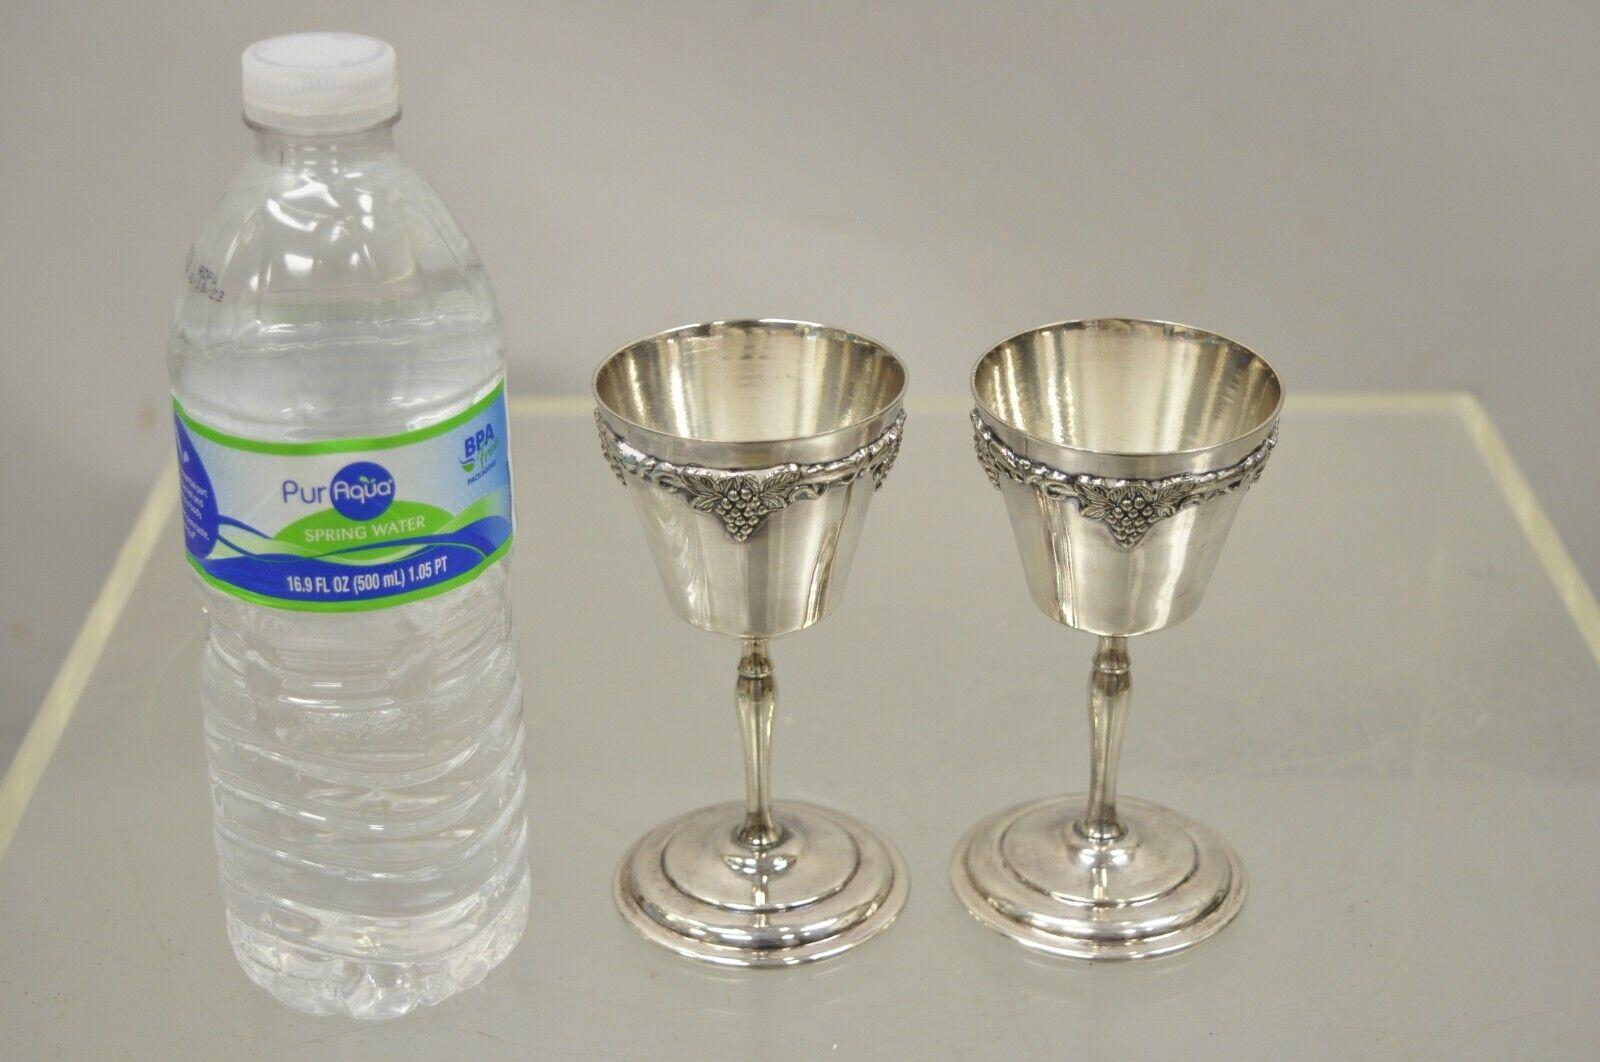 Antique Old English Repro Silver Plated Sherry Wine Liquor Goblet Cups Set of 2. Item features grape and vine details, original stamp, very nice antique pair, quality craftsmanship, great style and form. Circa Early 1900s. Measurements: 4.75